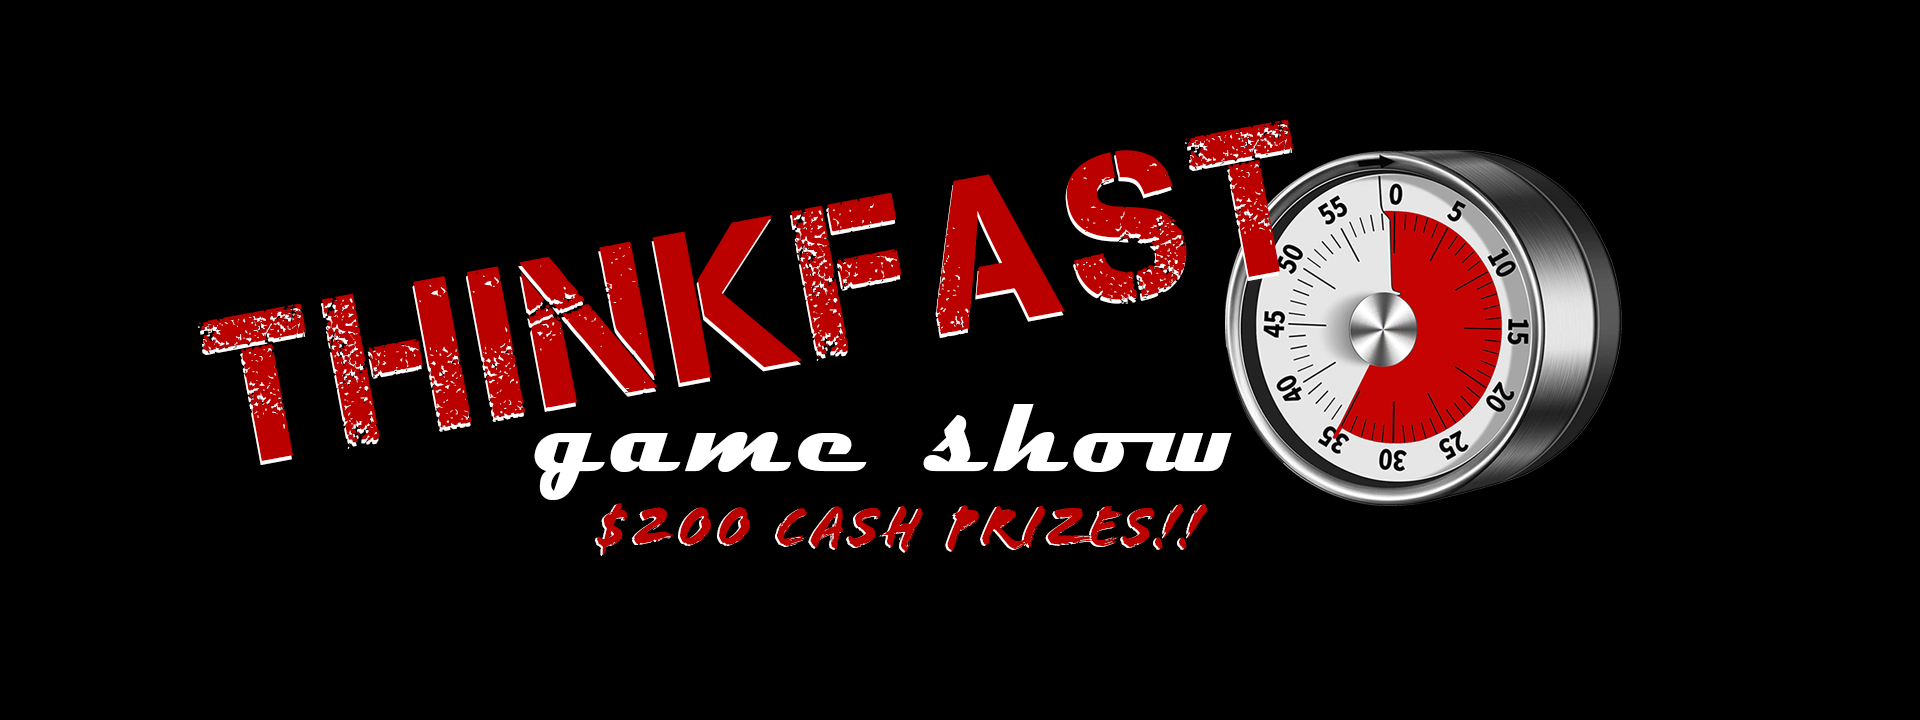 graphic for think fast game show